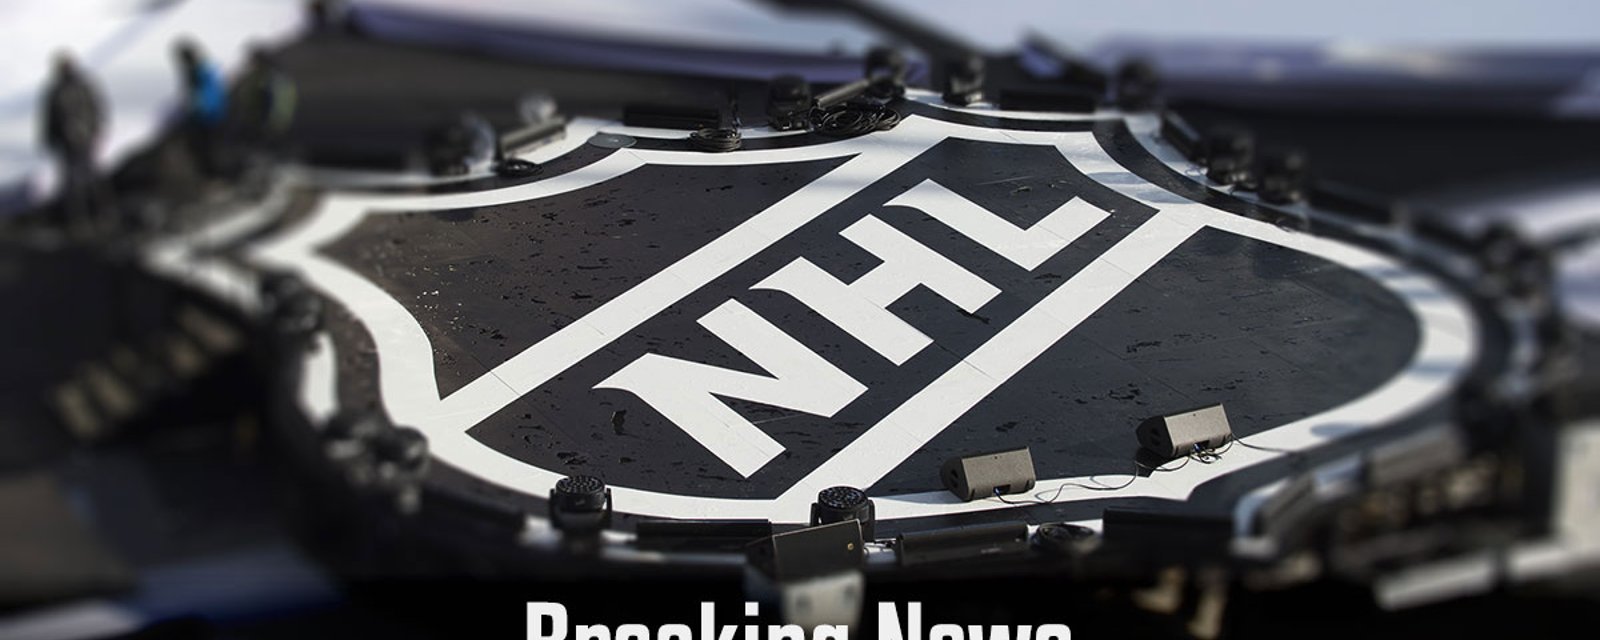 Breaking: 25-year-old center diagnosed with concussion, out “indefinitely.”